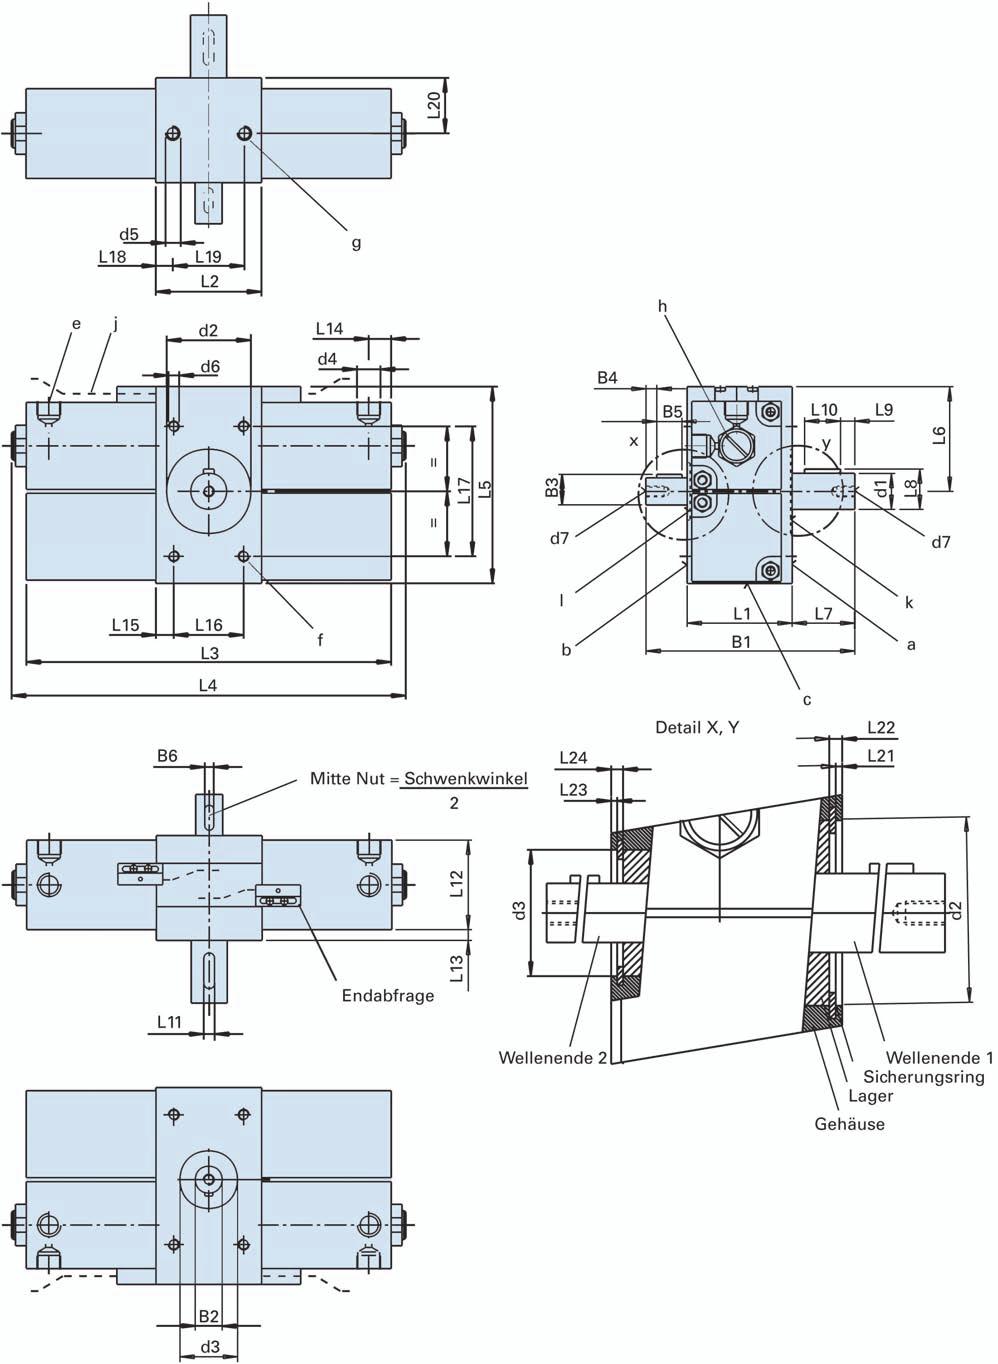 Pneumatic Actuator DA 1500, DA 3000, DA 6000 mid of keyway= rotation angle end position control shaft end 2 shaft end 1 Clip bearing housing DA a, b, c mounting surface e air connections f mounting